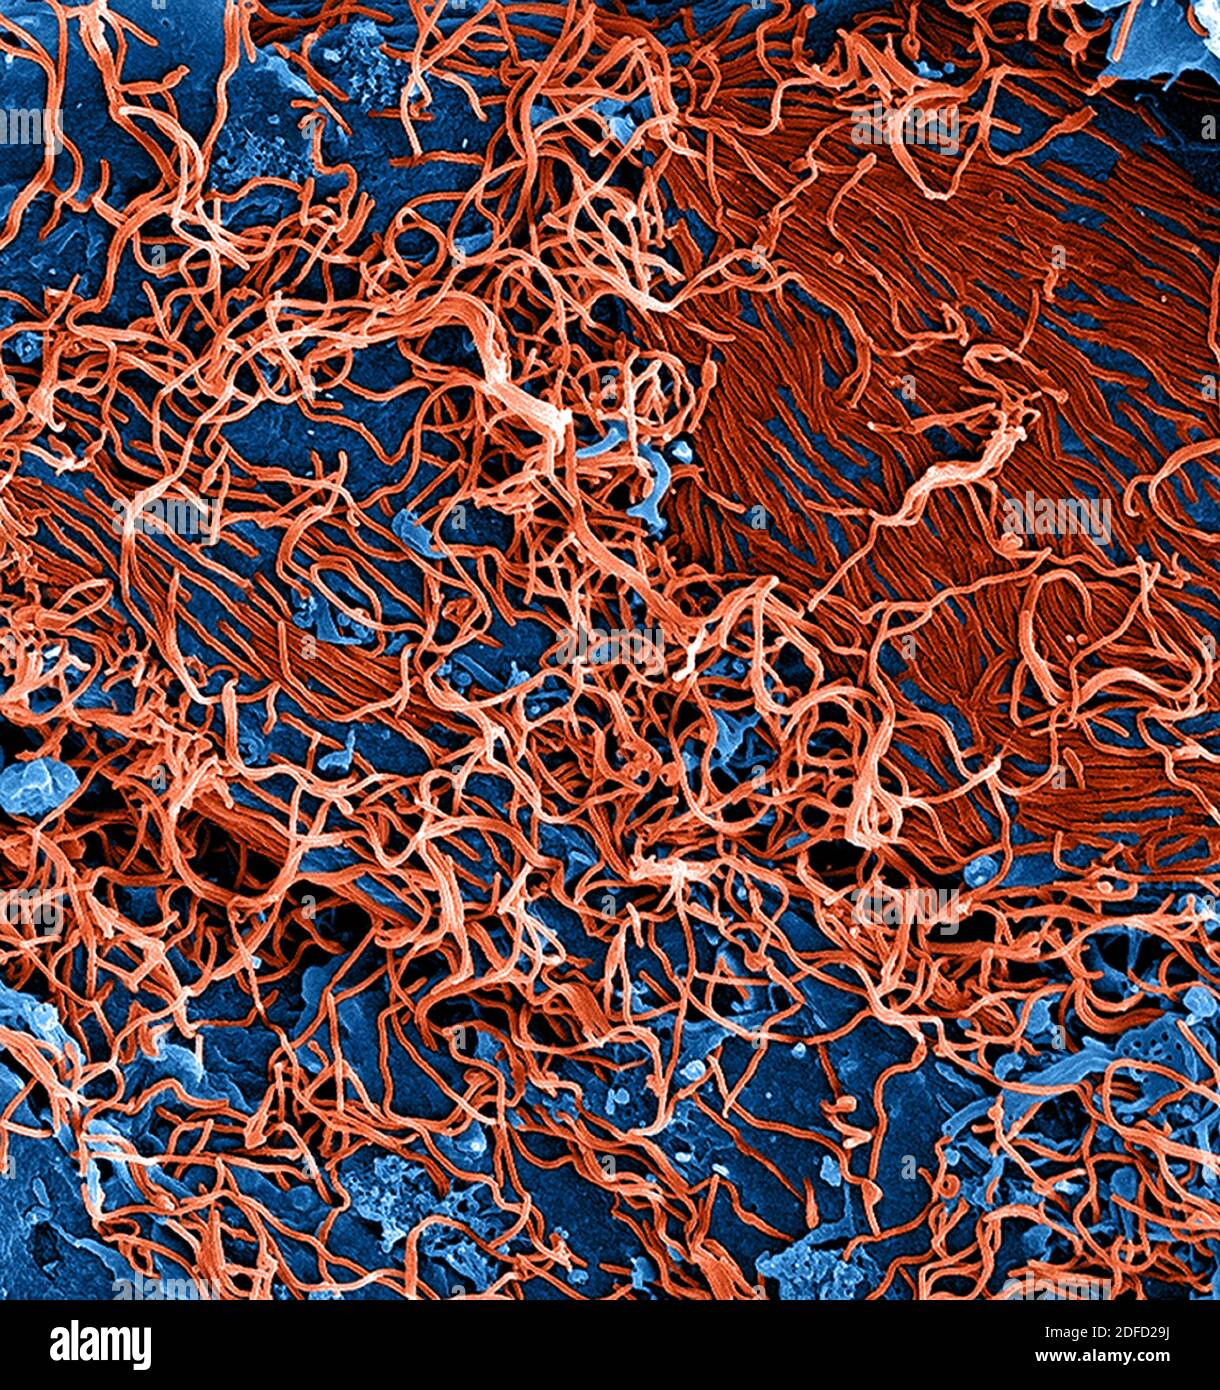 Colorized scanning electron micrograph of filamentous. Ebola virus particles (red) attached and budding from. a chronically infected VERO E6 cell (blu Stock Photo